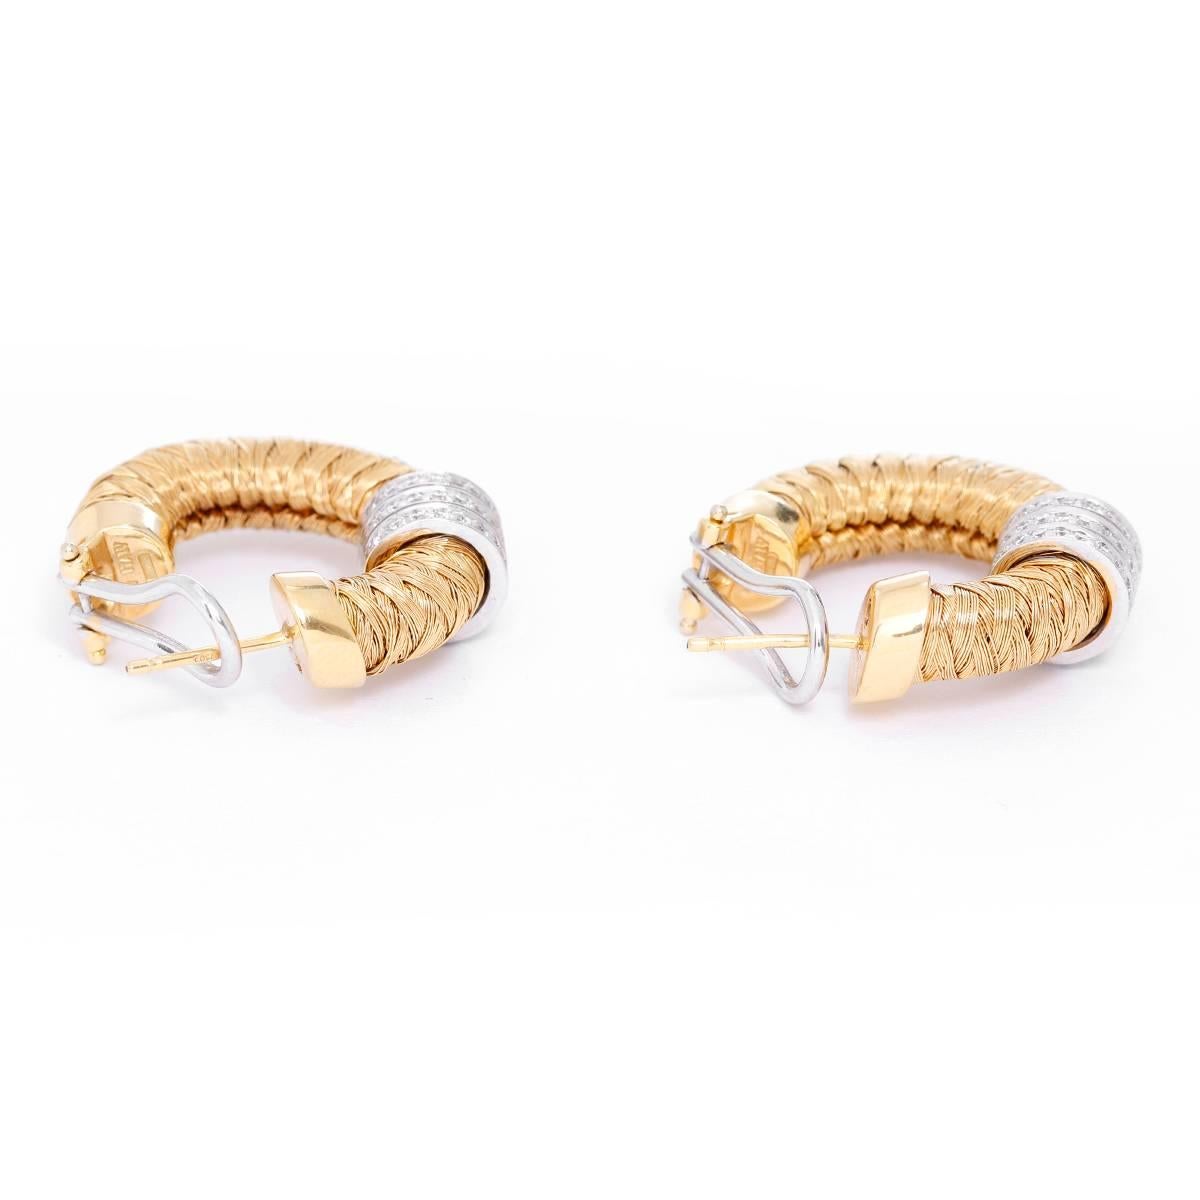 Roberto Coin 18k Gold and Diamond Hoop Earrings - 18k Gold Basketweave Hoop Earrings, Signed 18k Italy. Gorgeous earrings with perfectly subtle touch of elegance. 